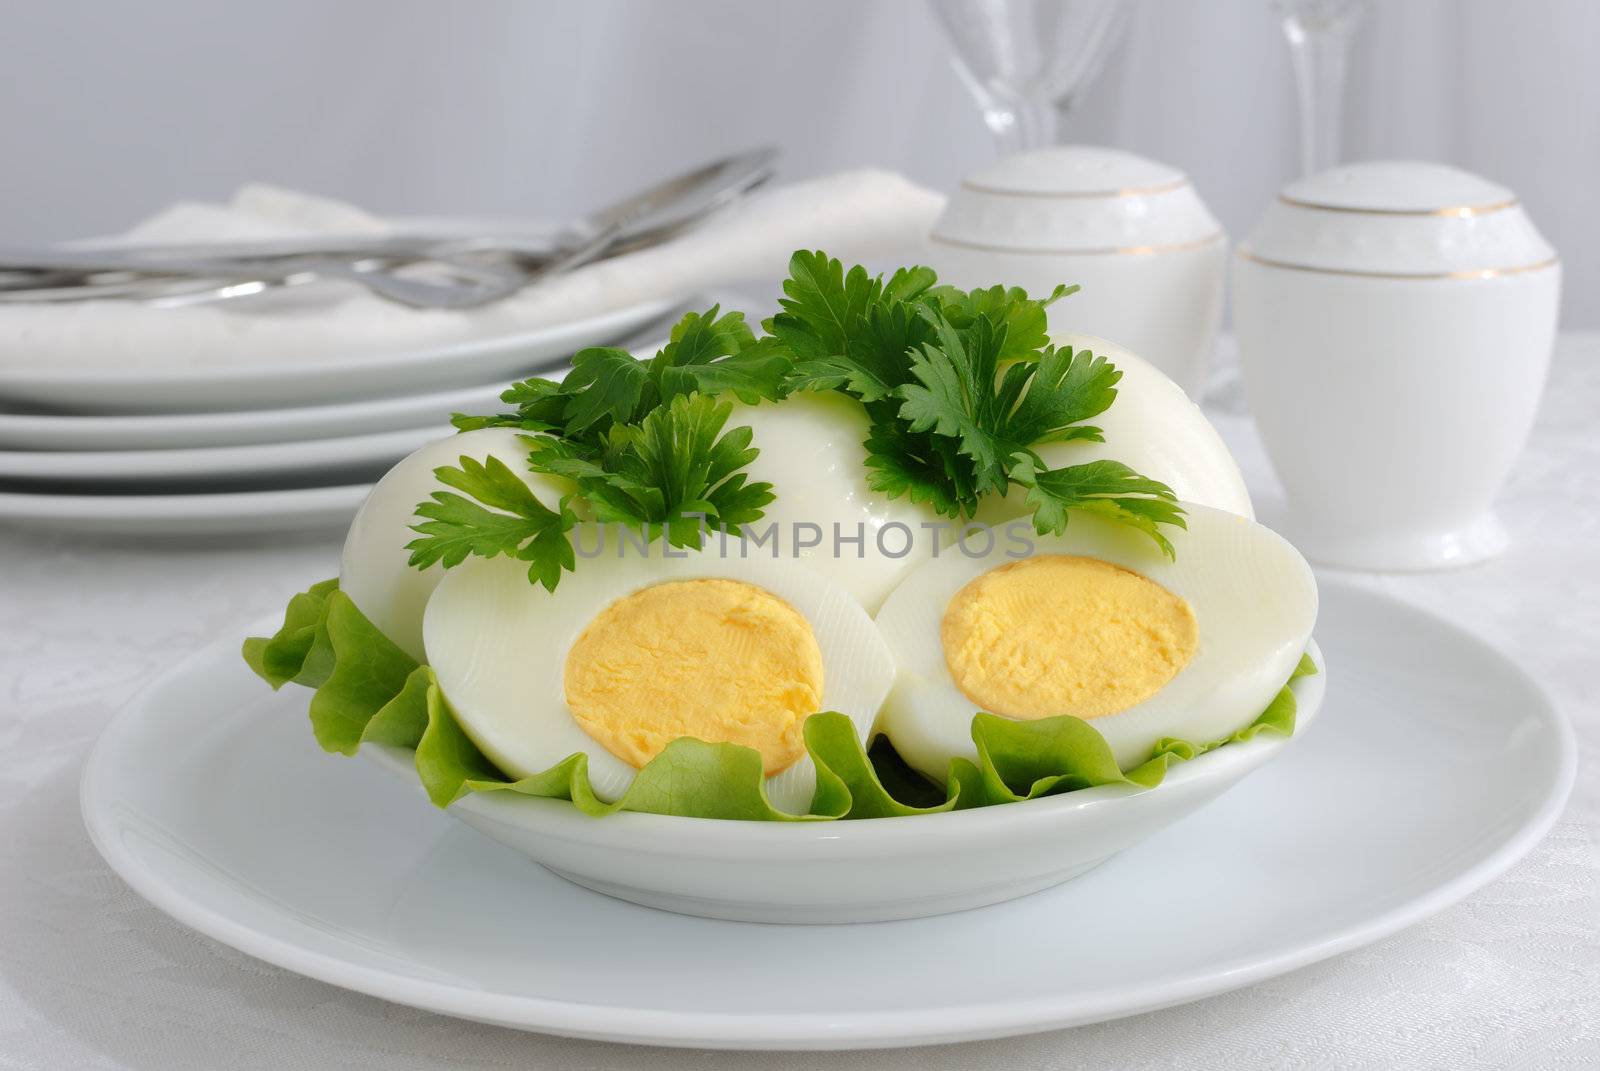 Boiled eggs with herbs in the context of by Apolonia